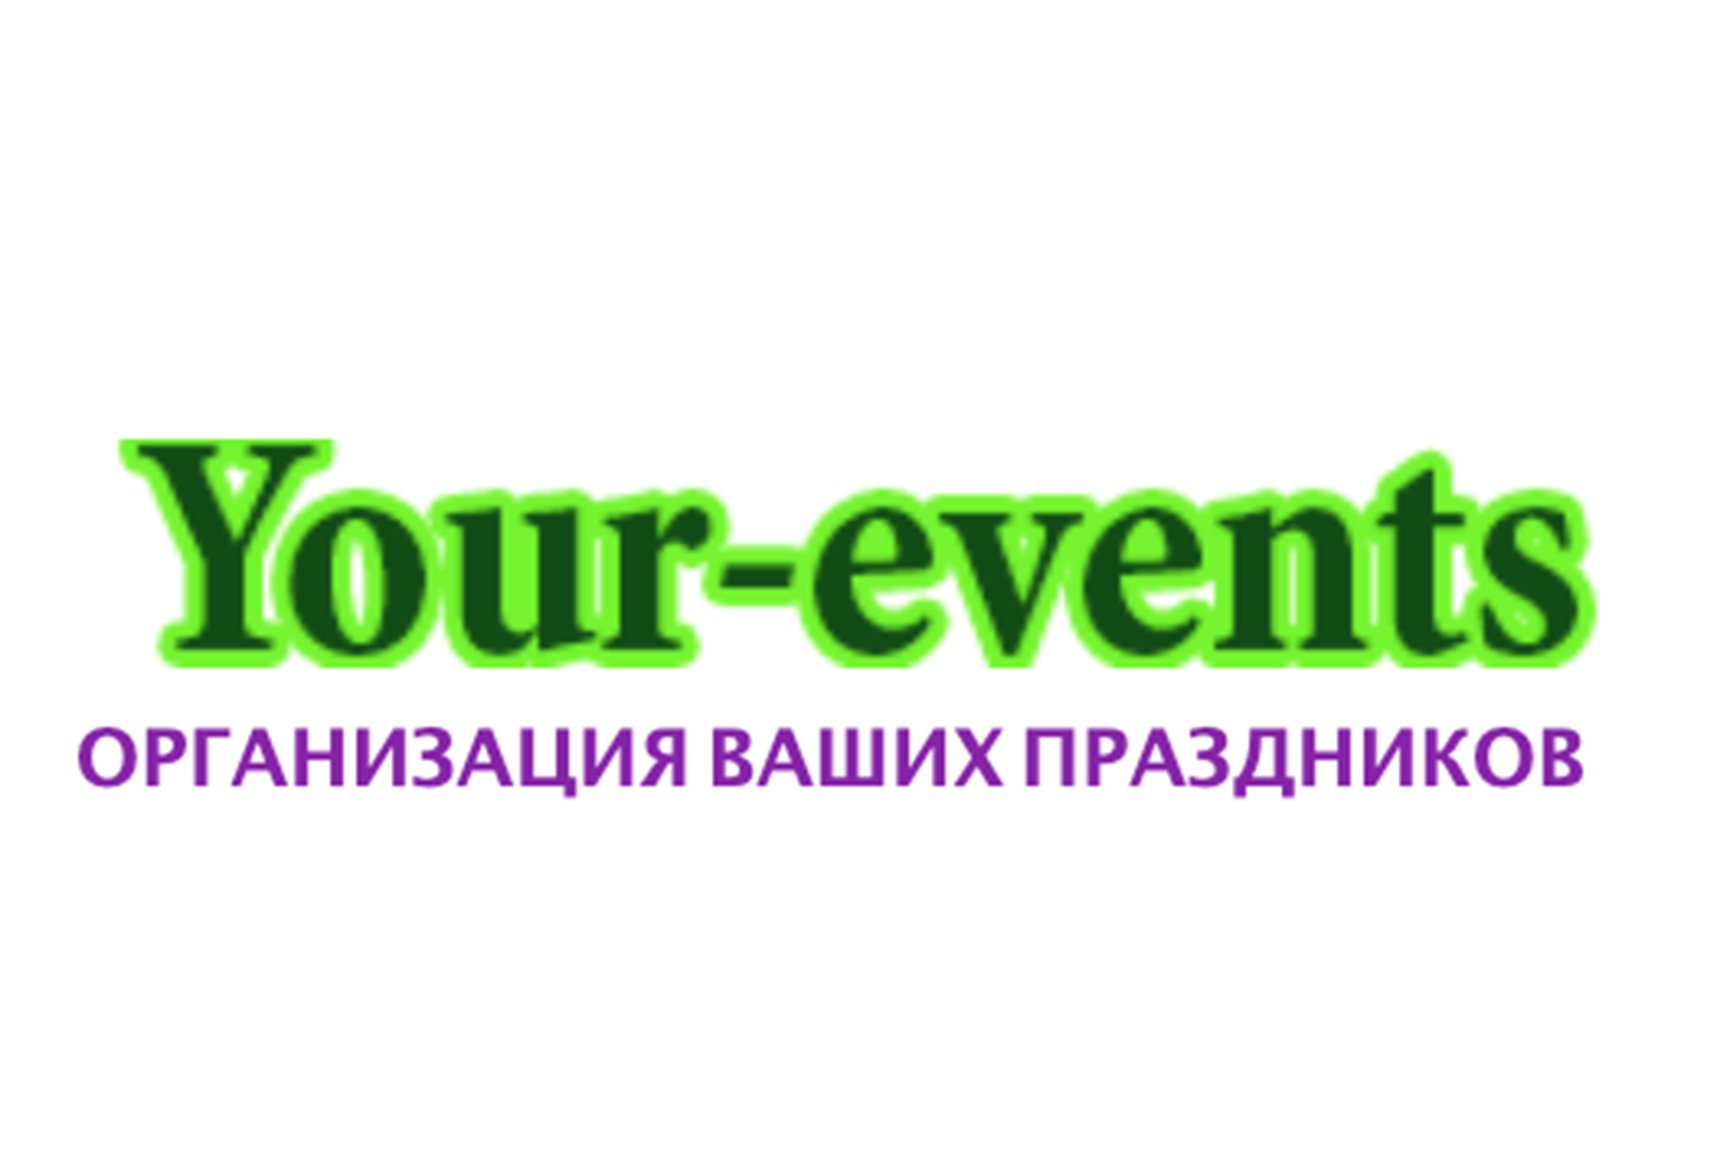 Your events